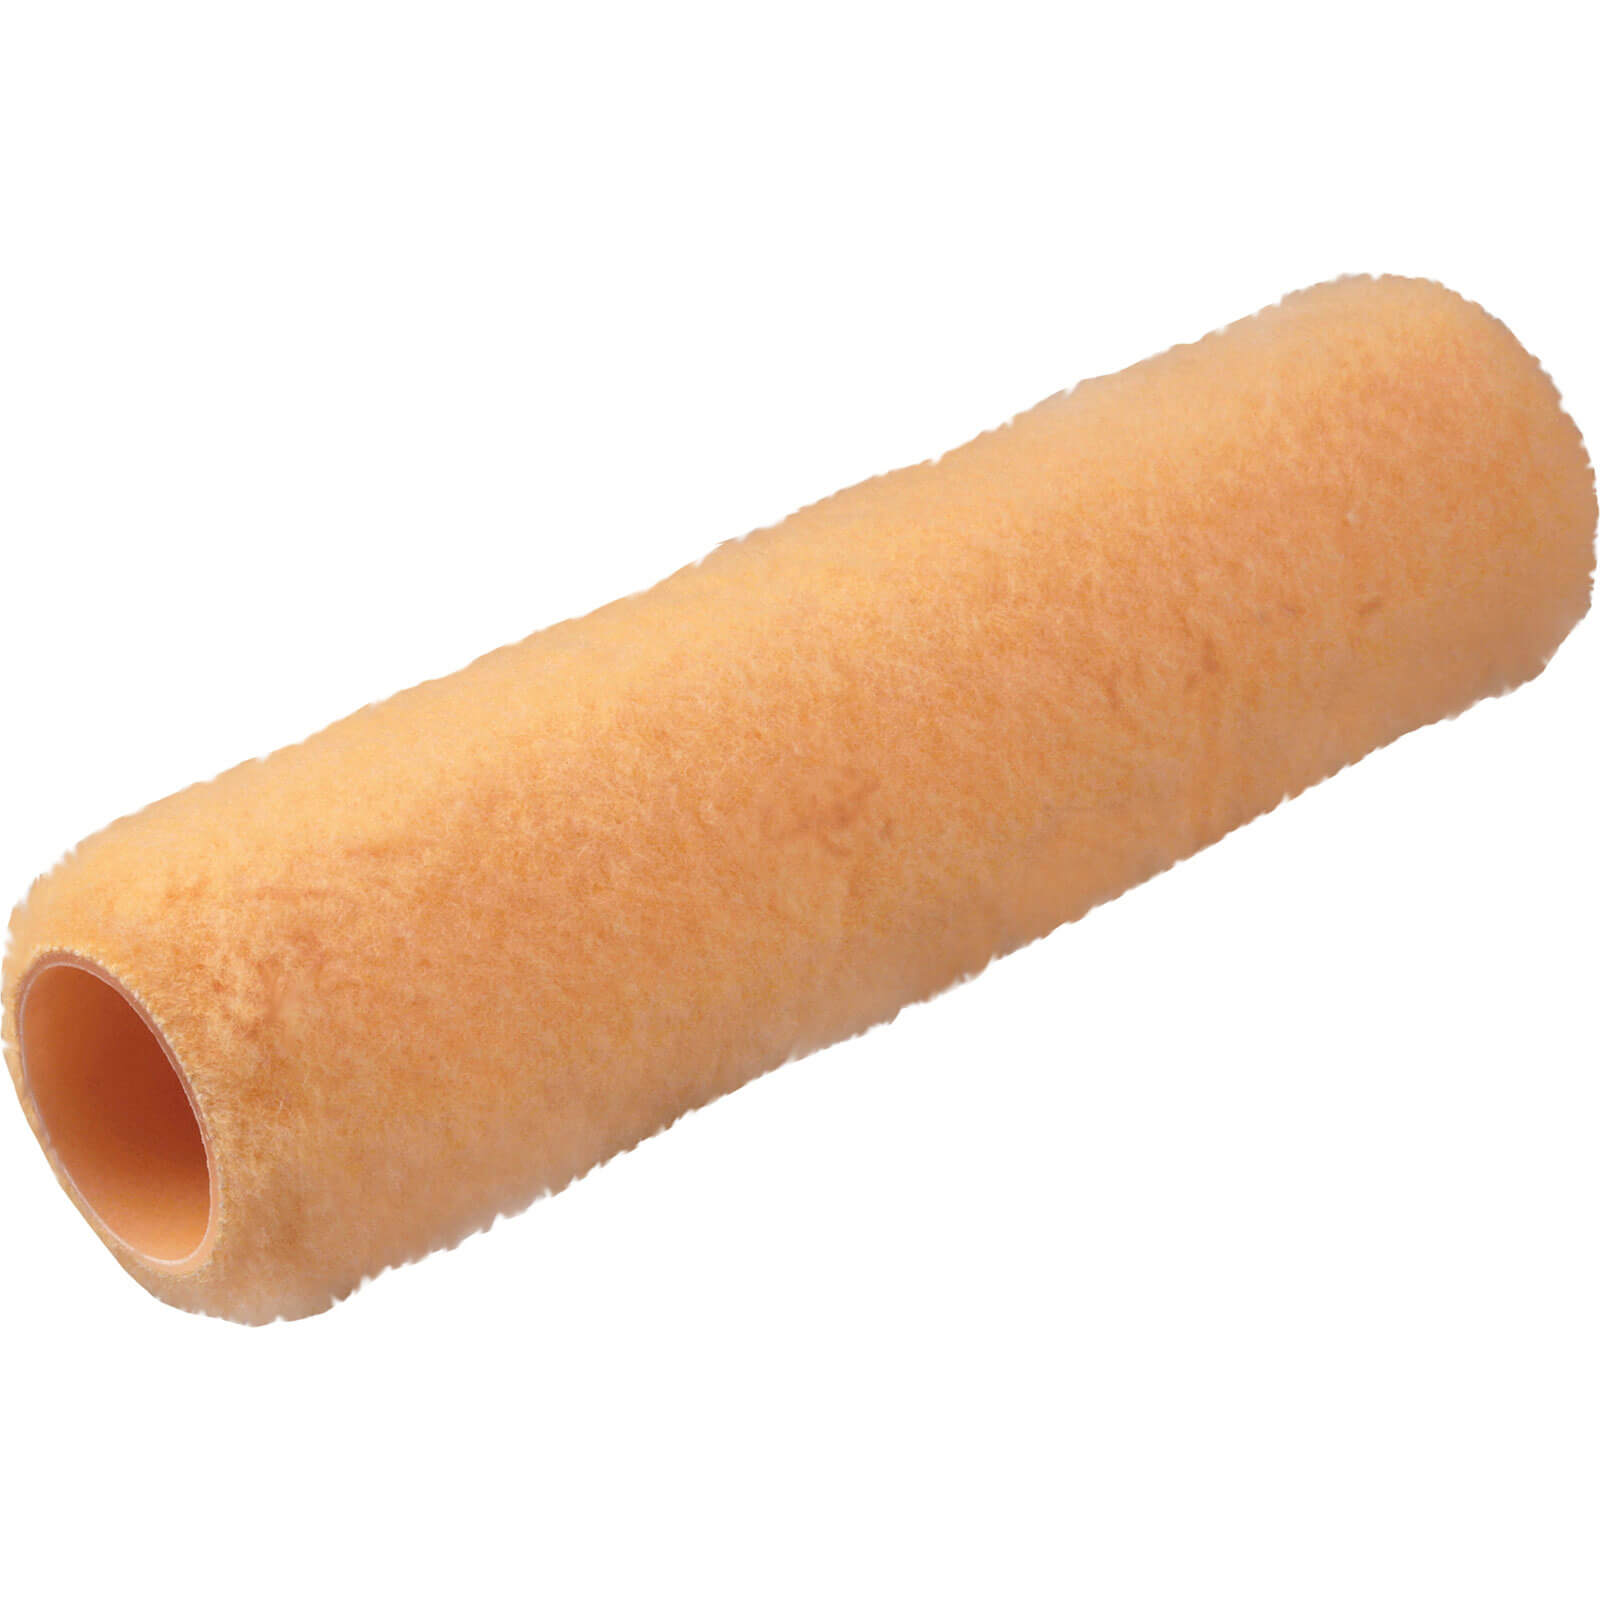 Photo of Stanley Long Pile Paint Roller Sleeve 44mm 230mm